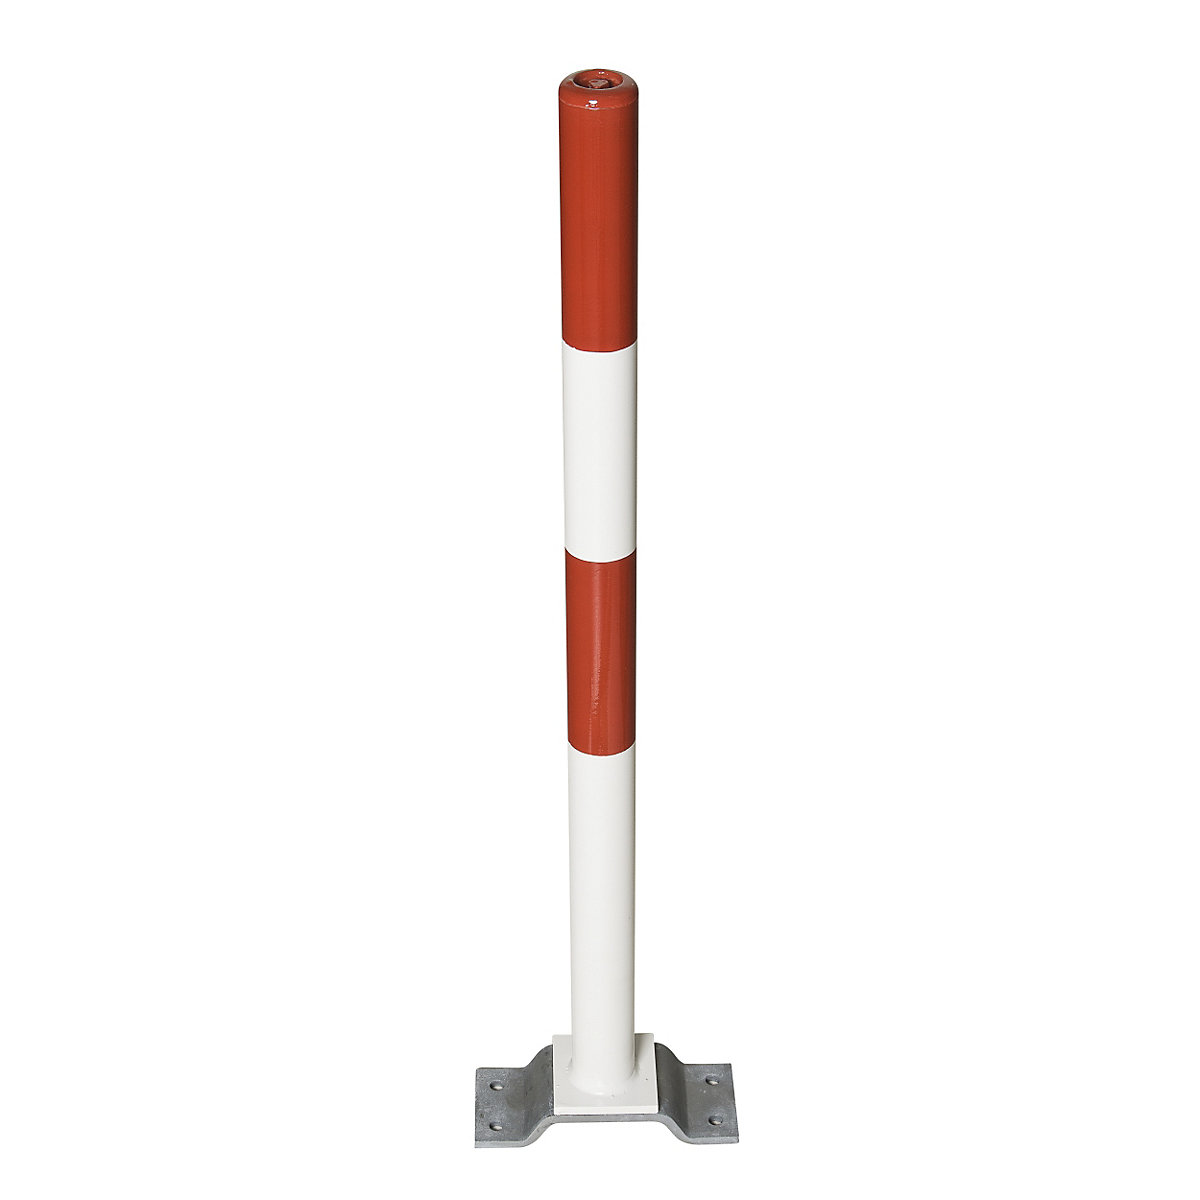 Barrier post made of steel, for bolting in place, Ø 60 mm, red/white, 2 chain eyelets-4